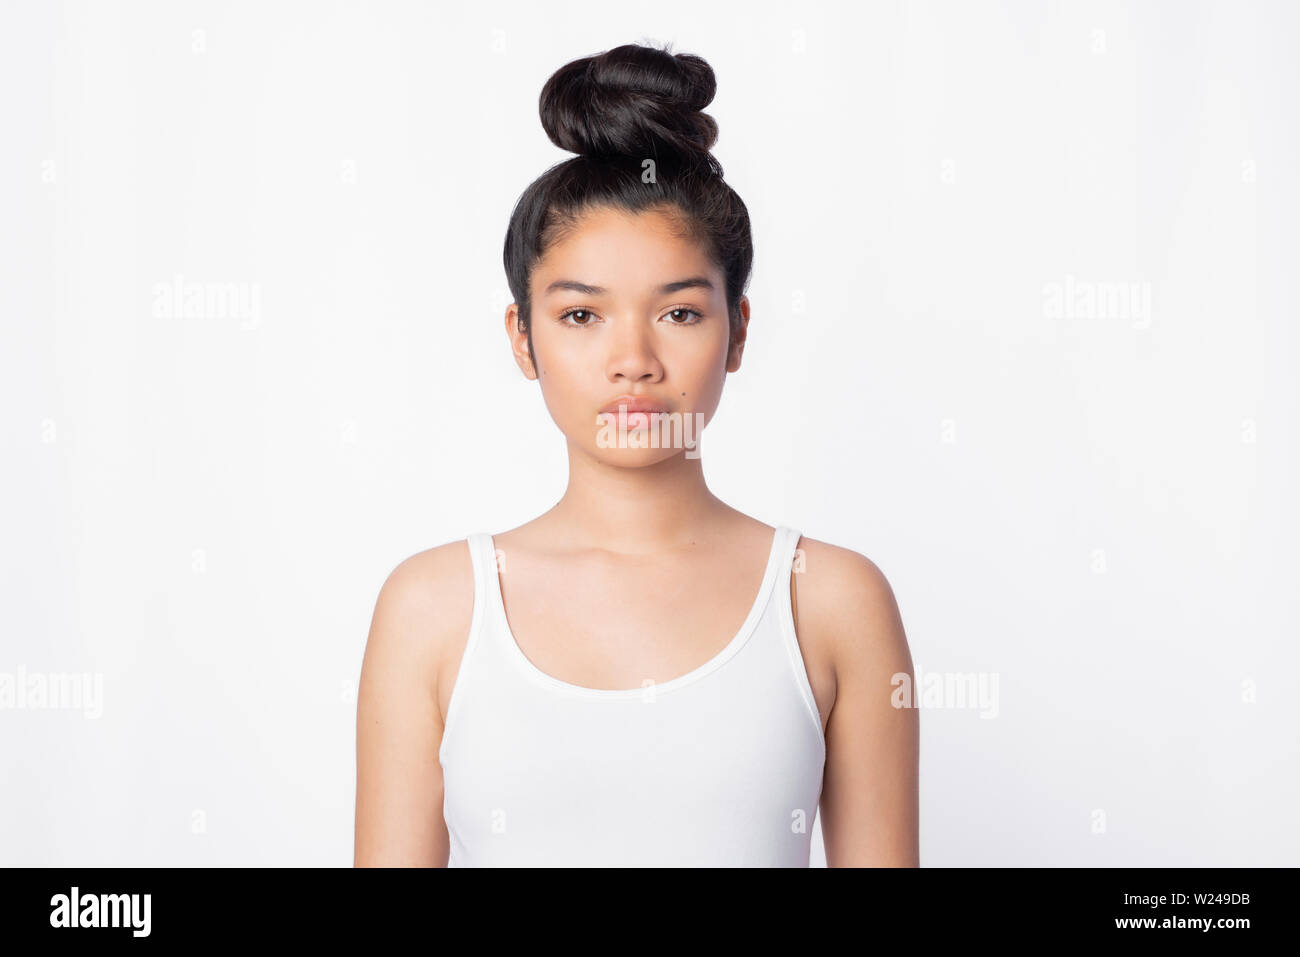 serious confident asian woman in white Top staring at camera Stock Photo